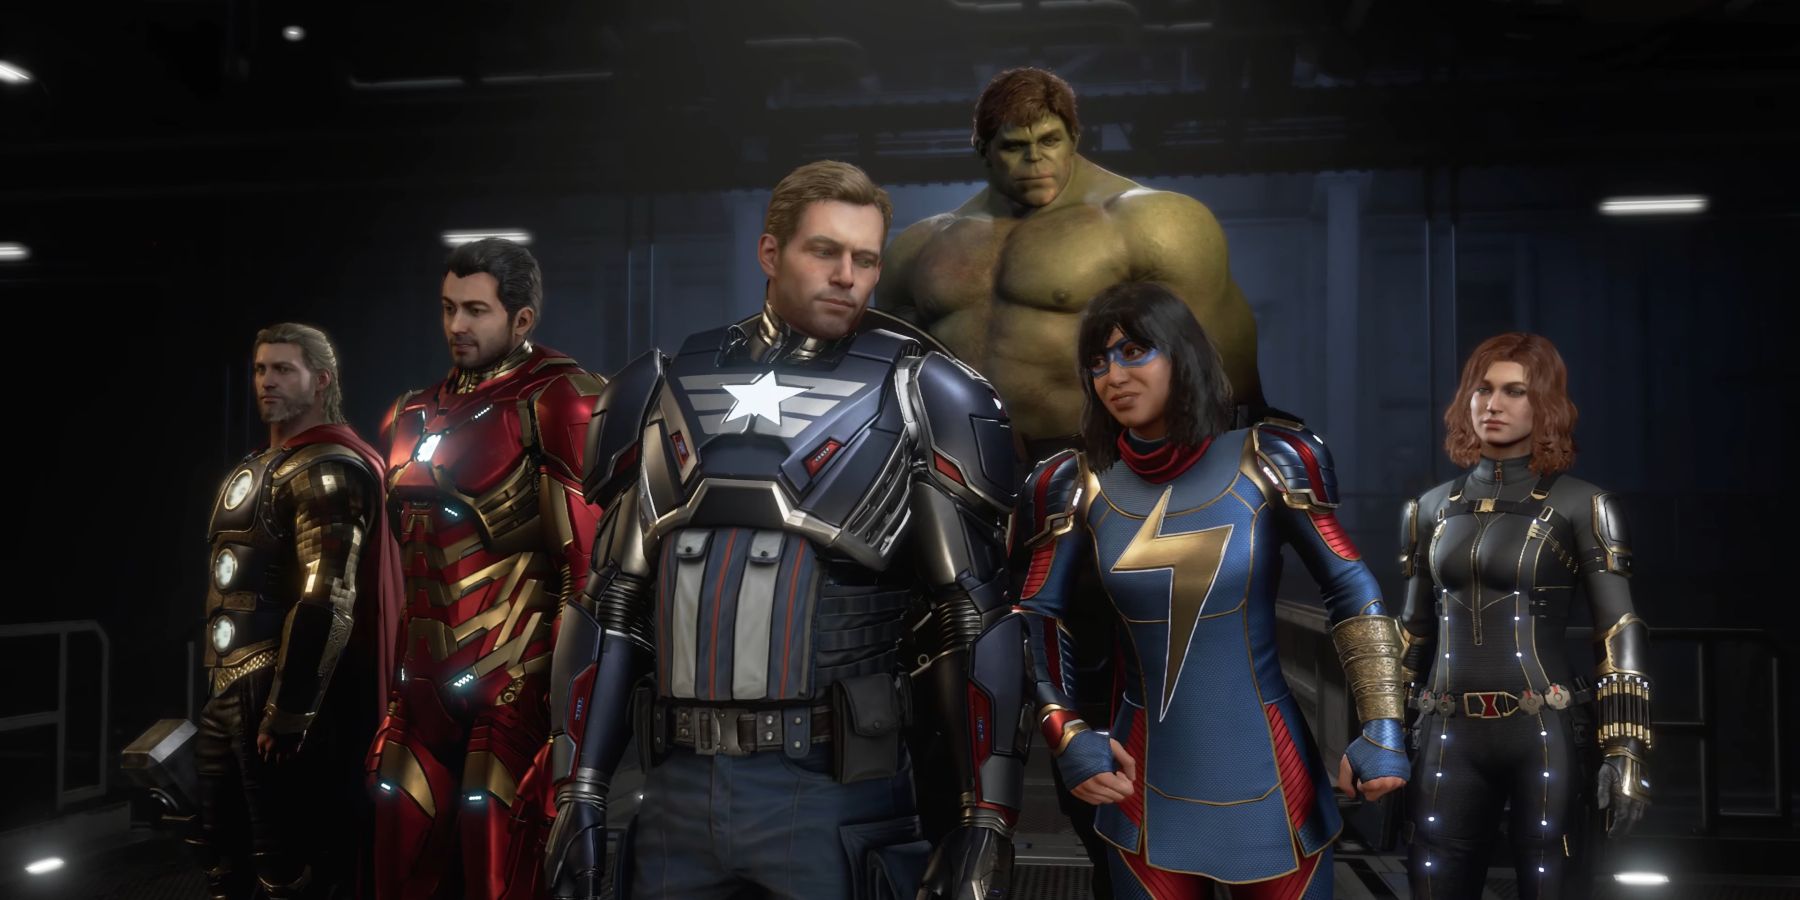 10 Best Quotes In The Marvels Avengers Campaigns Ranked